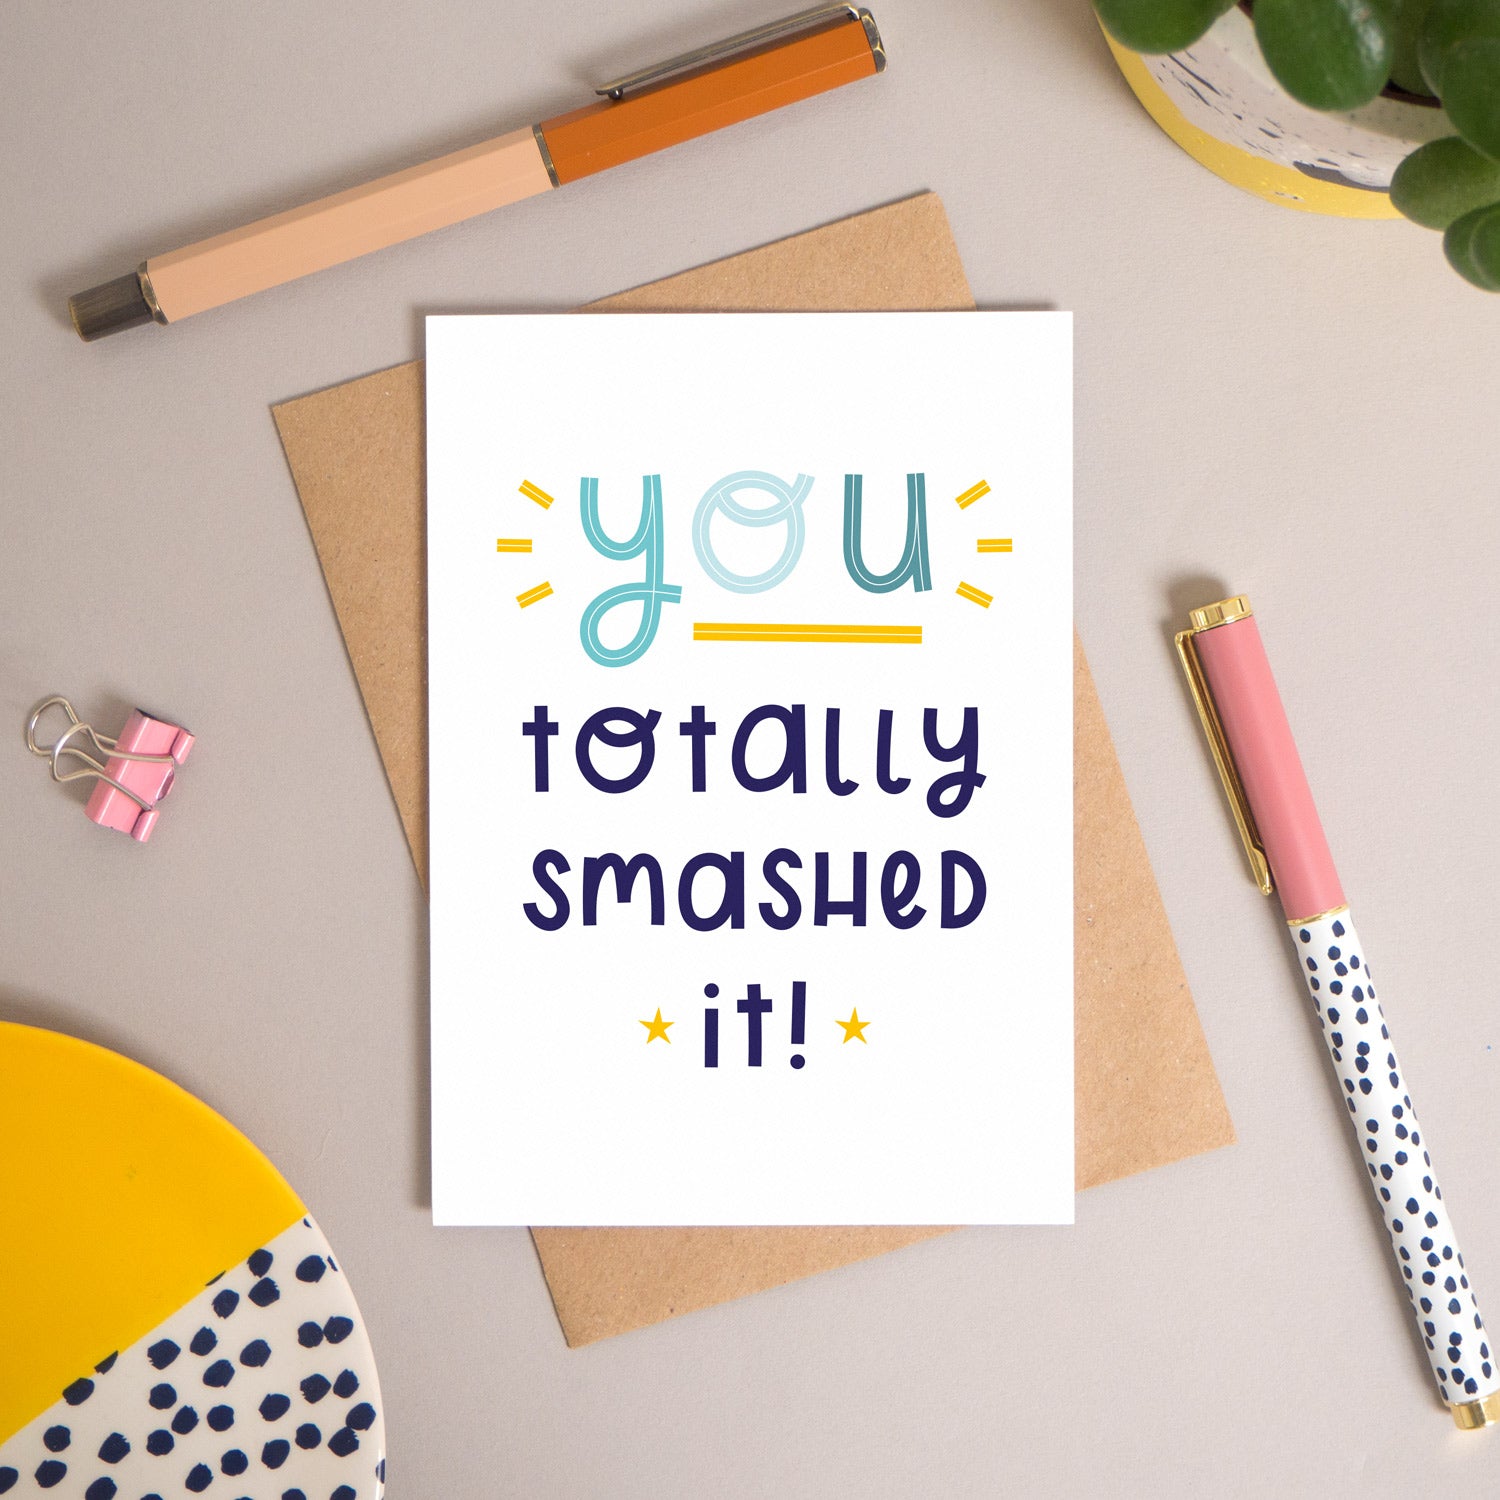 This ‘you totally smashed it’ card has been shot flatlay style looking directly over the top of the card. It is lying flat on it’s kraft brown envelope, on a warm grey background. Surrounding the card are pens, a clip, a plant and a trinket dish. This version of the card is in varying tones of navy and blue.